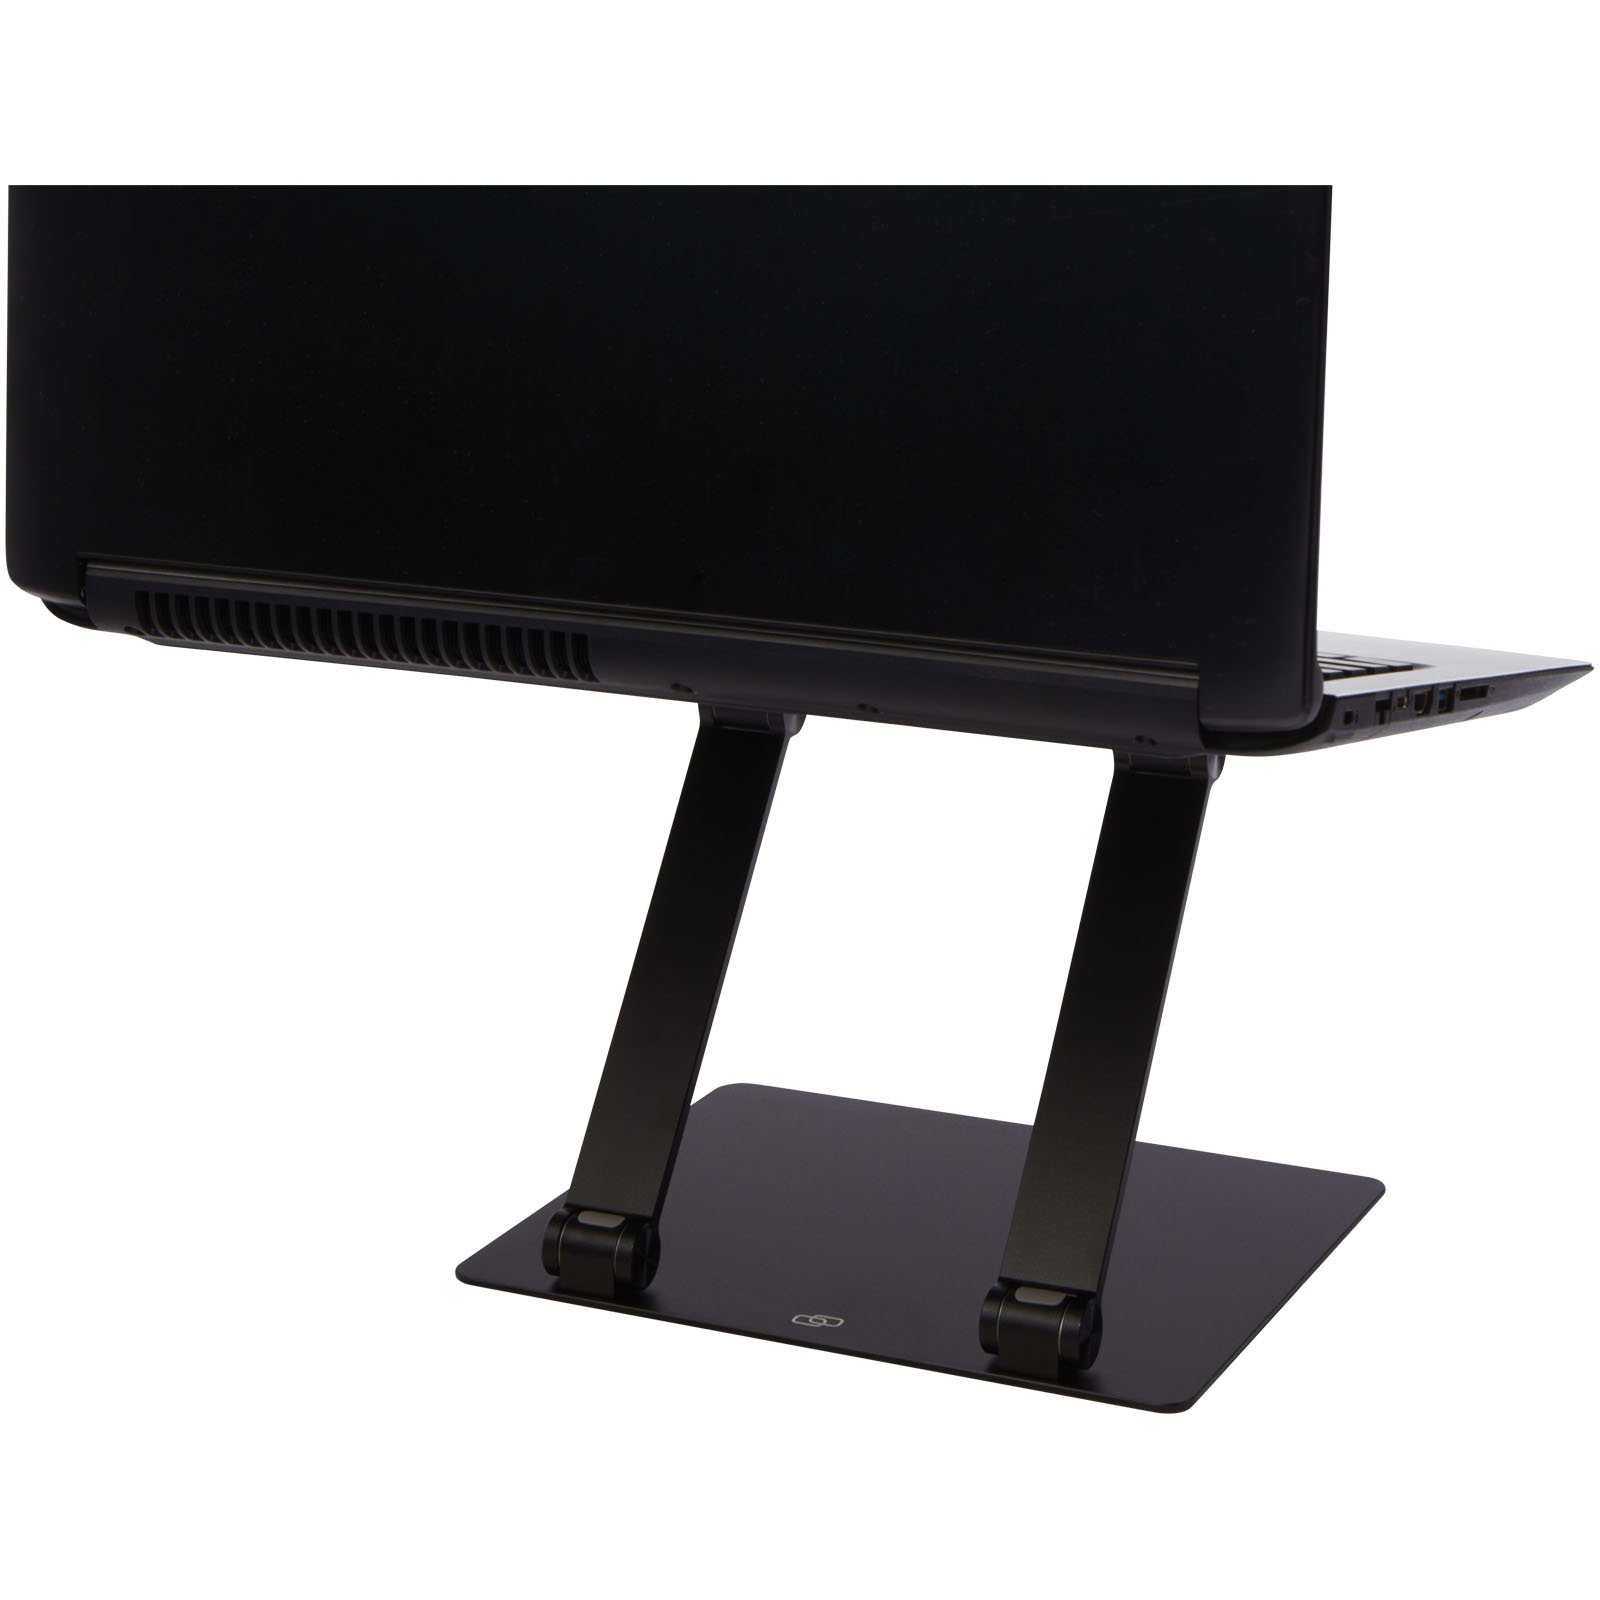 Advertising Computer Accessories - Rise Pro laptop stand - 3